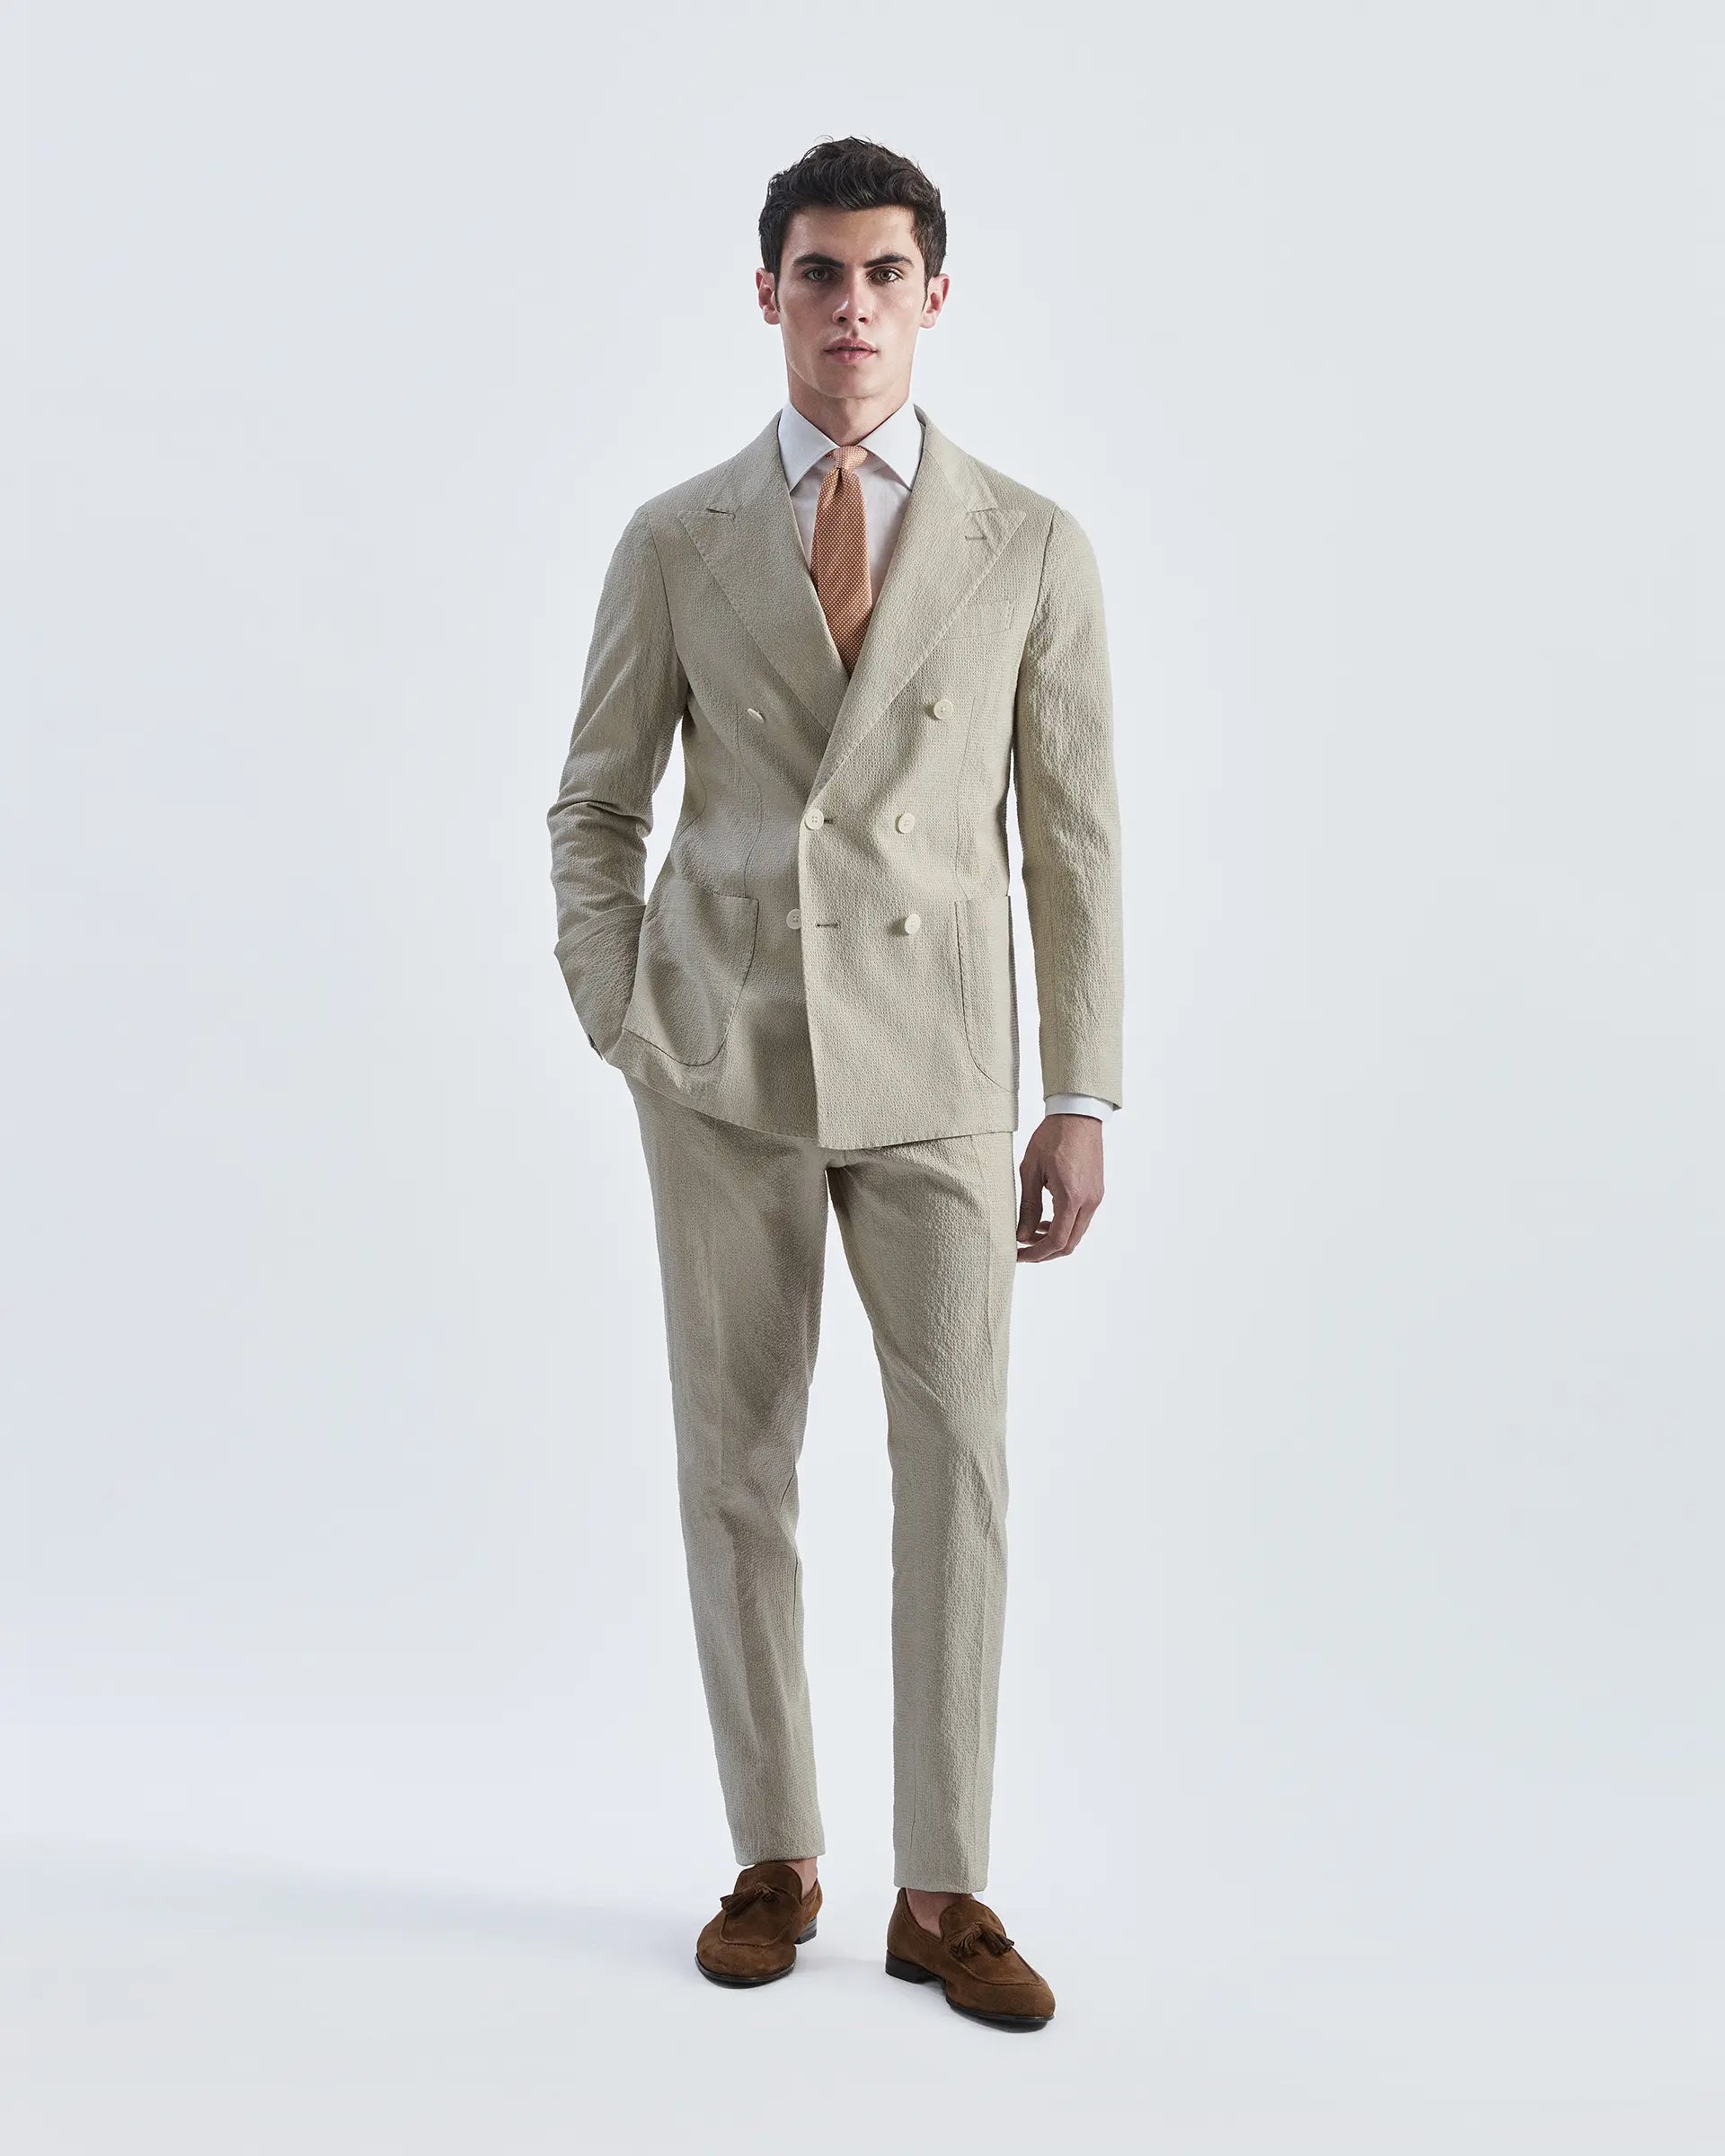 Beige double-breasted suit in cotton and linen seersuker Subalpino fabric